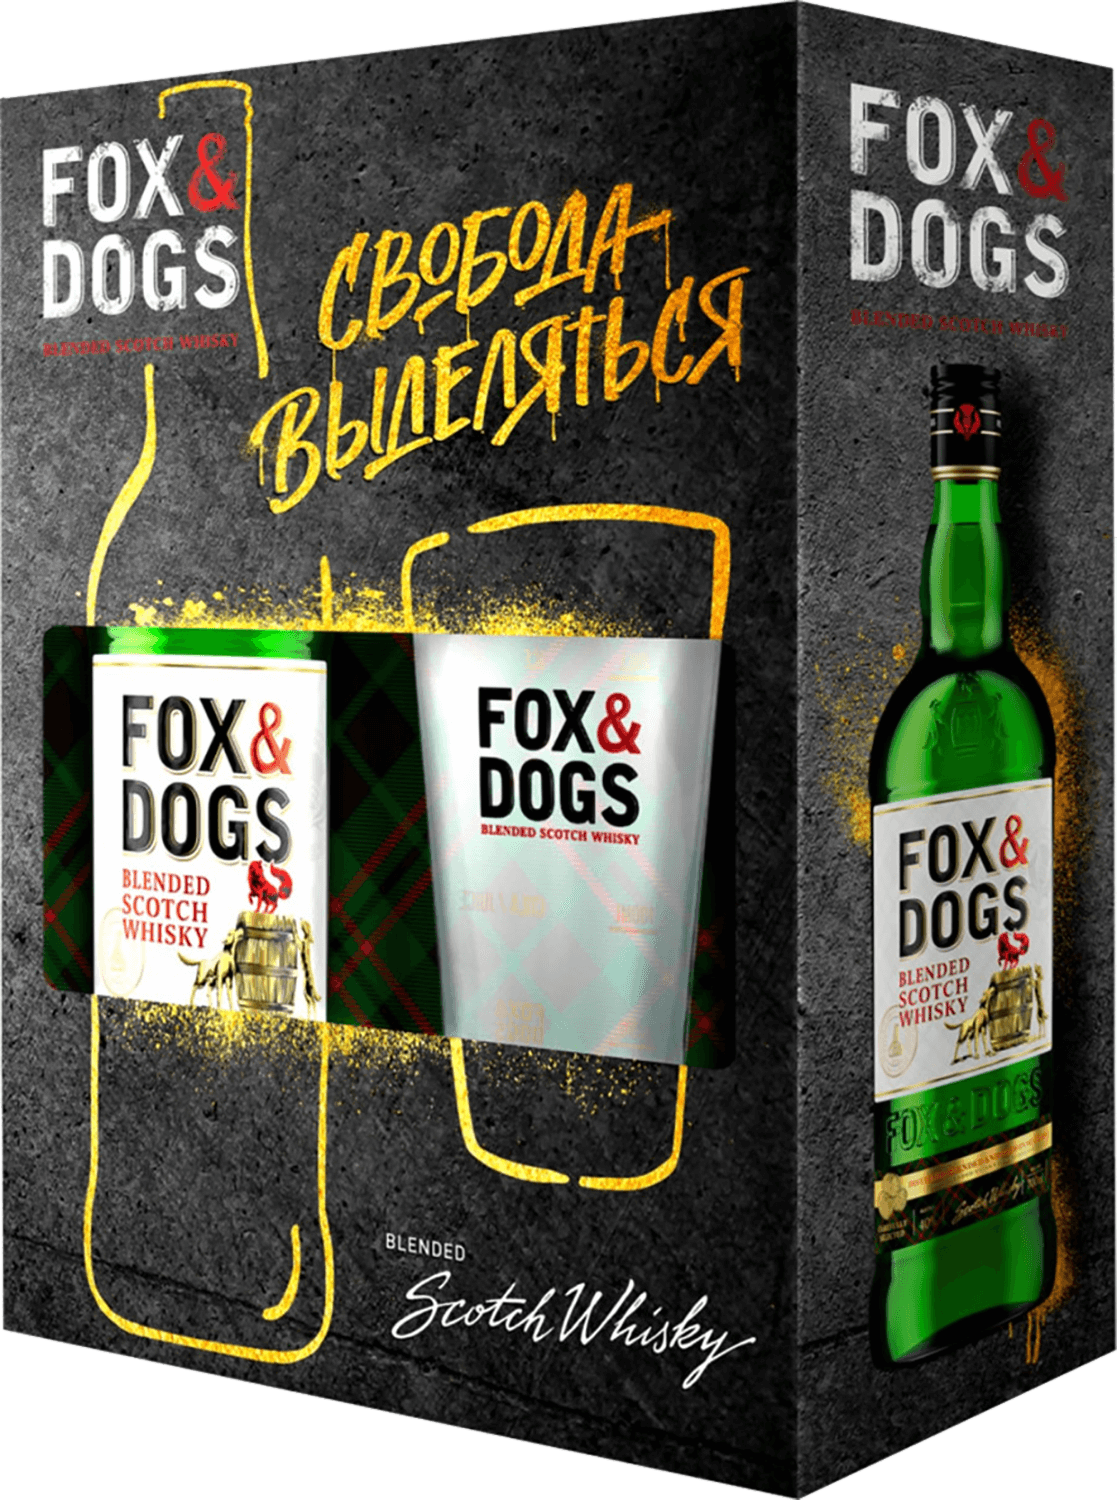 Fox and Dogs Blended Scotch Whisky (gift box with a glass)